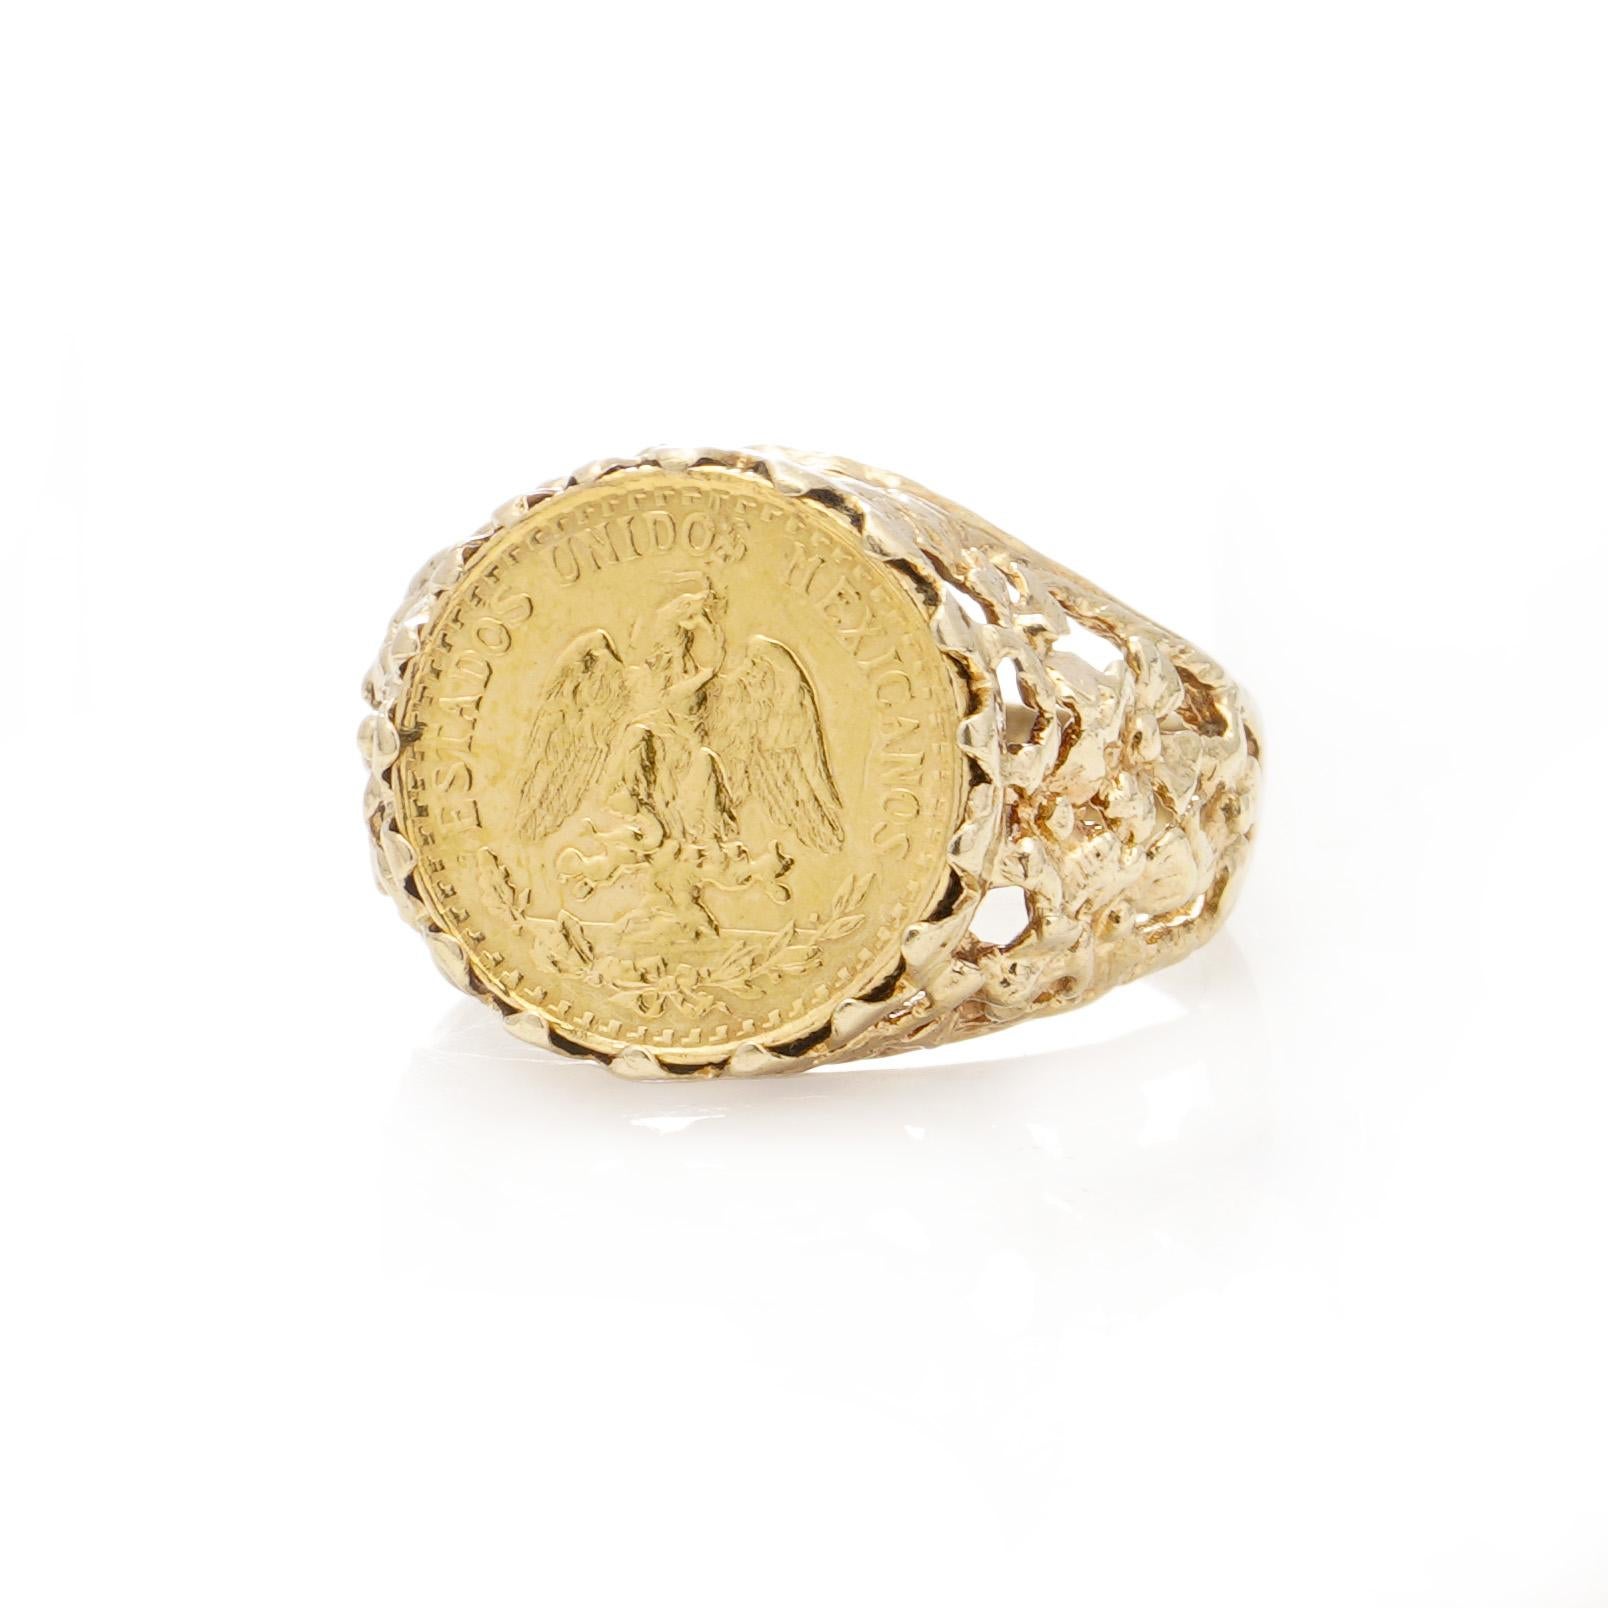 The 1945 Dos Pesos coin, crafted from 22ct gold, is mounted on a 9ct gold ring shank, hallmarked accordingly. The coin's authenticity as 22kt gold has been confirmed through X-ray testing.

The dimensions -
Finger Size (UK) = M (EU) = 54 (US) =